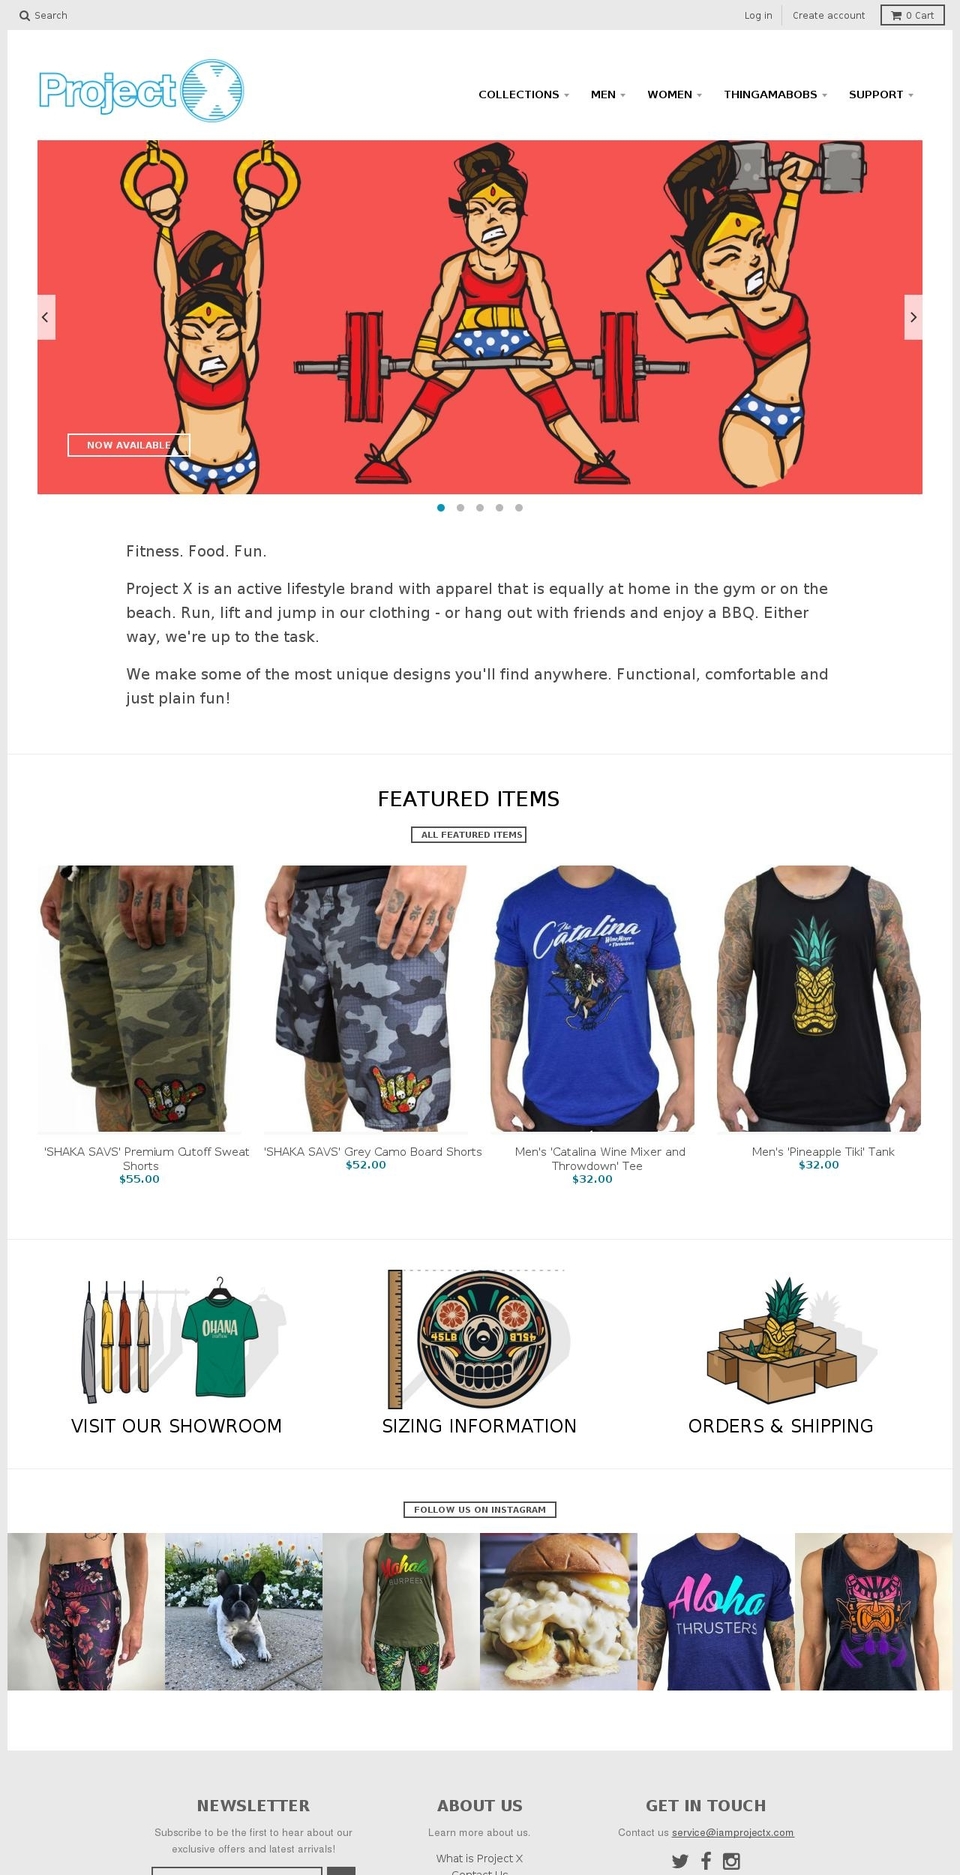 District Shopify theme site example iamprojectx.com